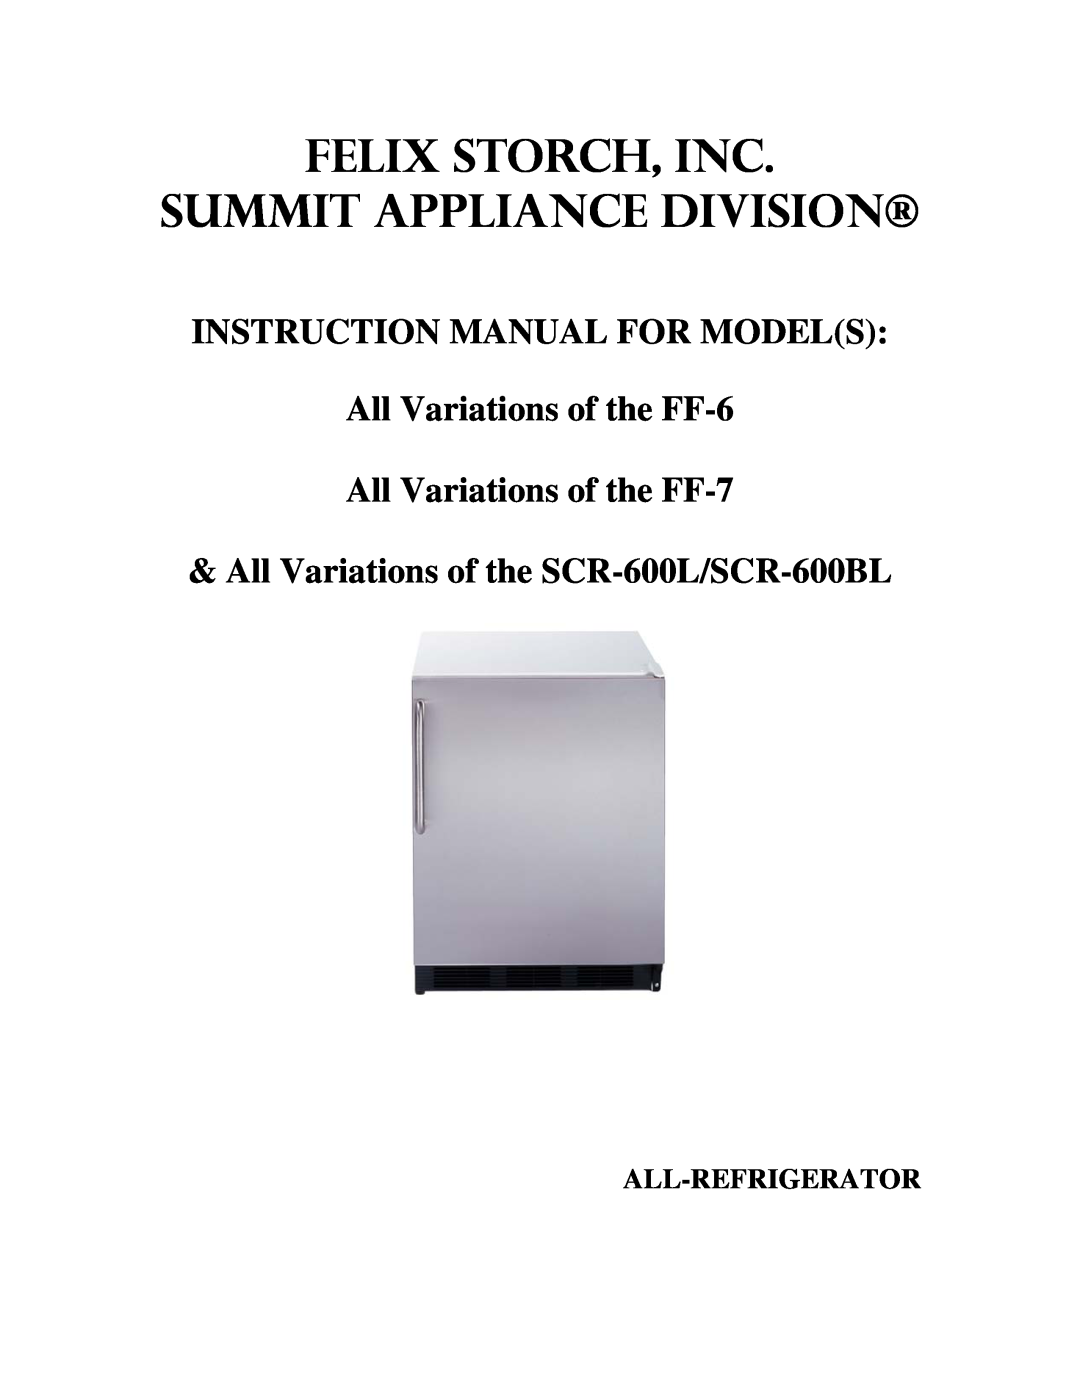 Summit FF-6 instruction manual All Variations of the FF-7 All Variations of the SCR-600L/SCR-600BL, All-Refrigerator 